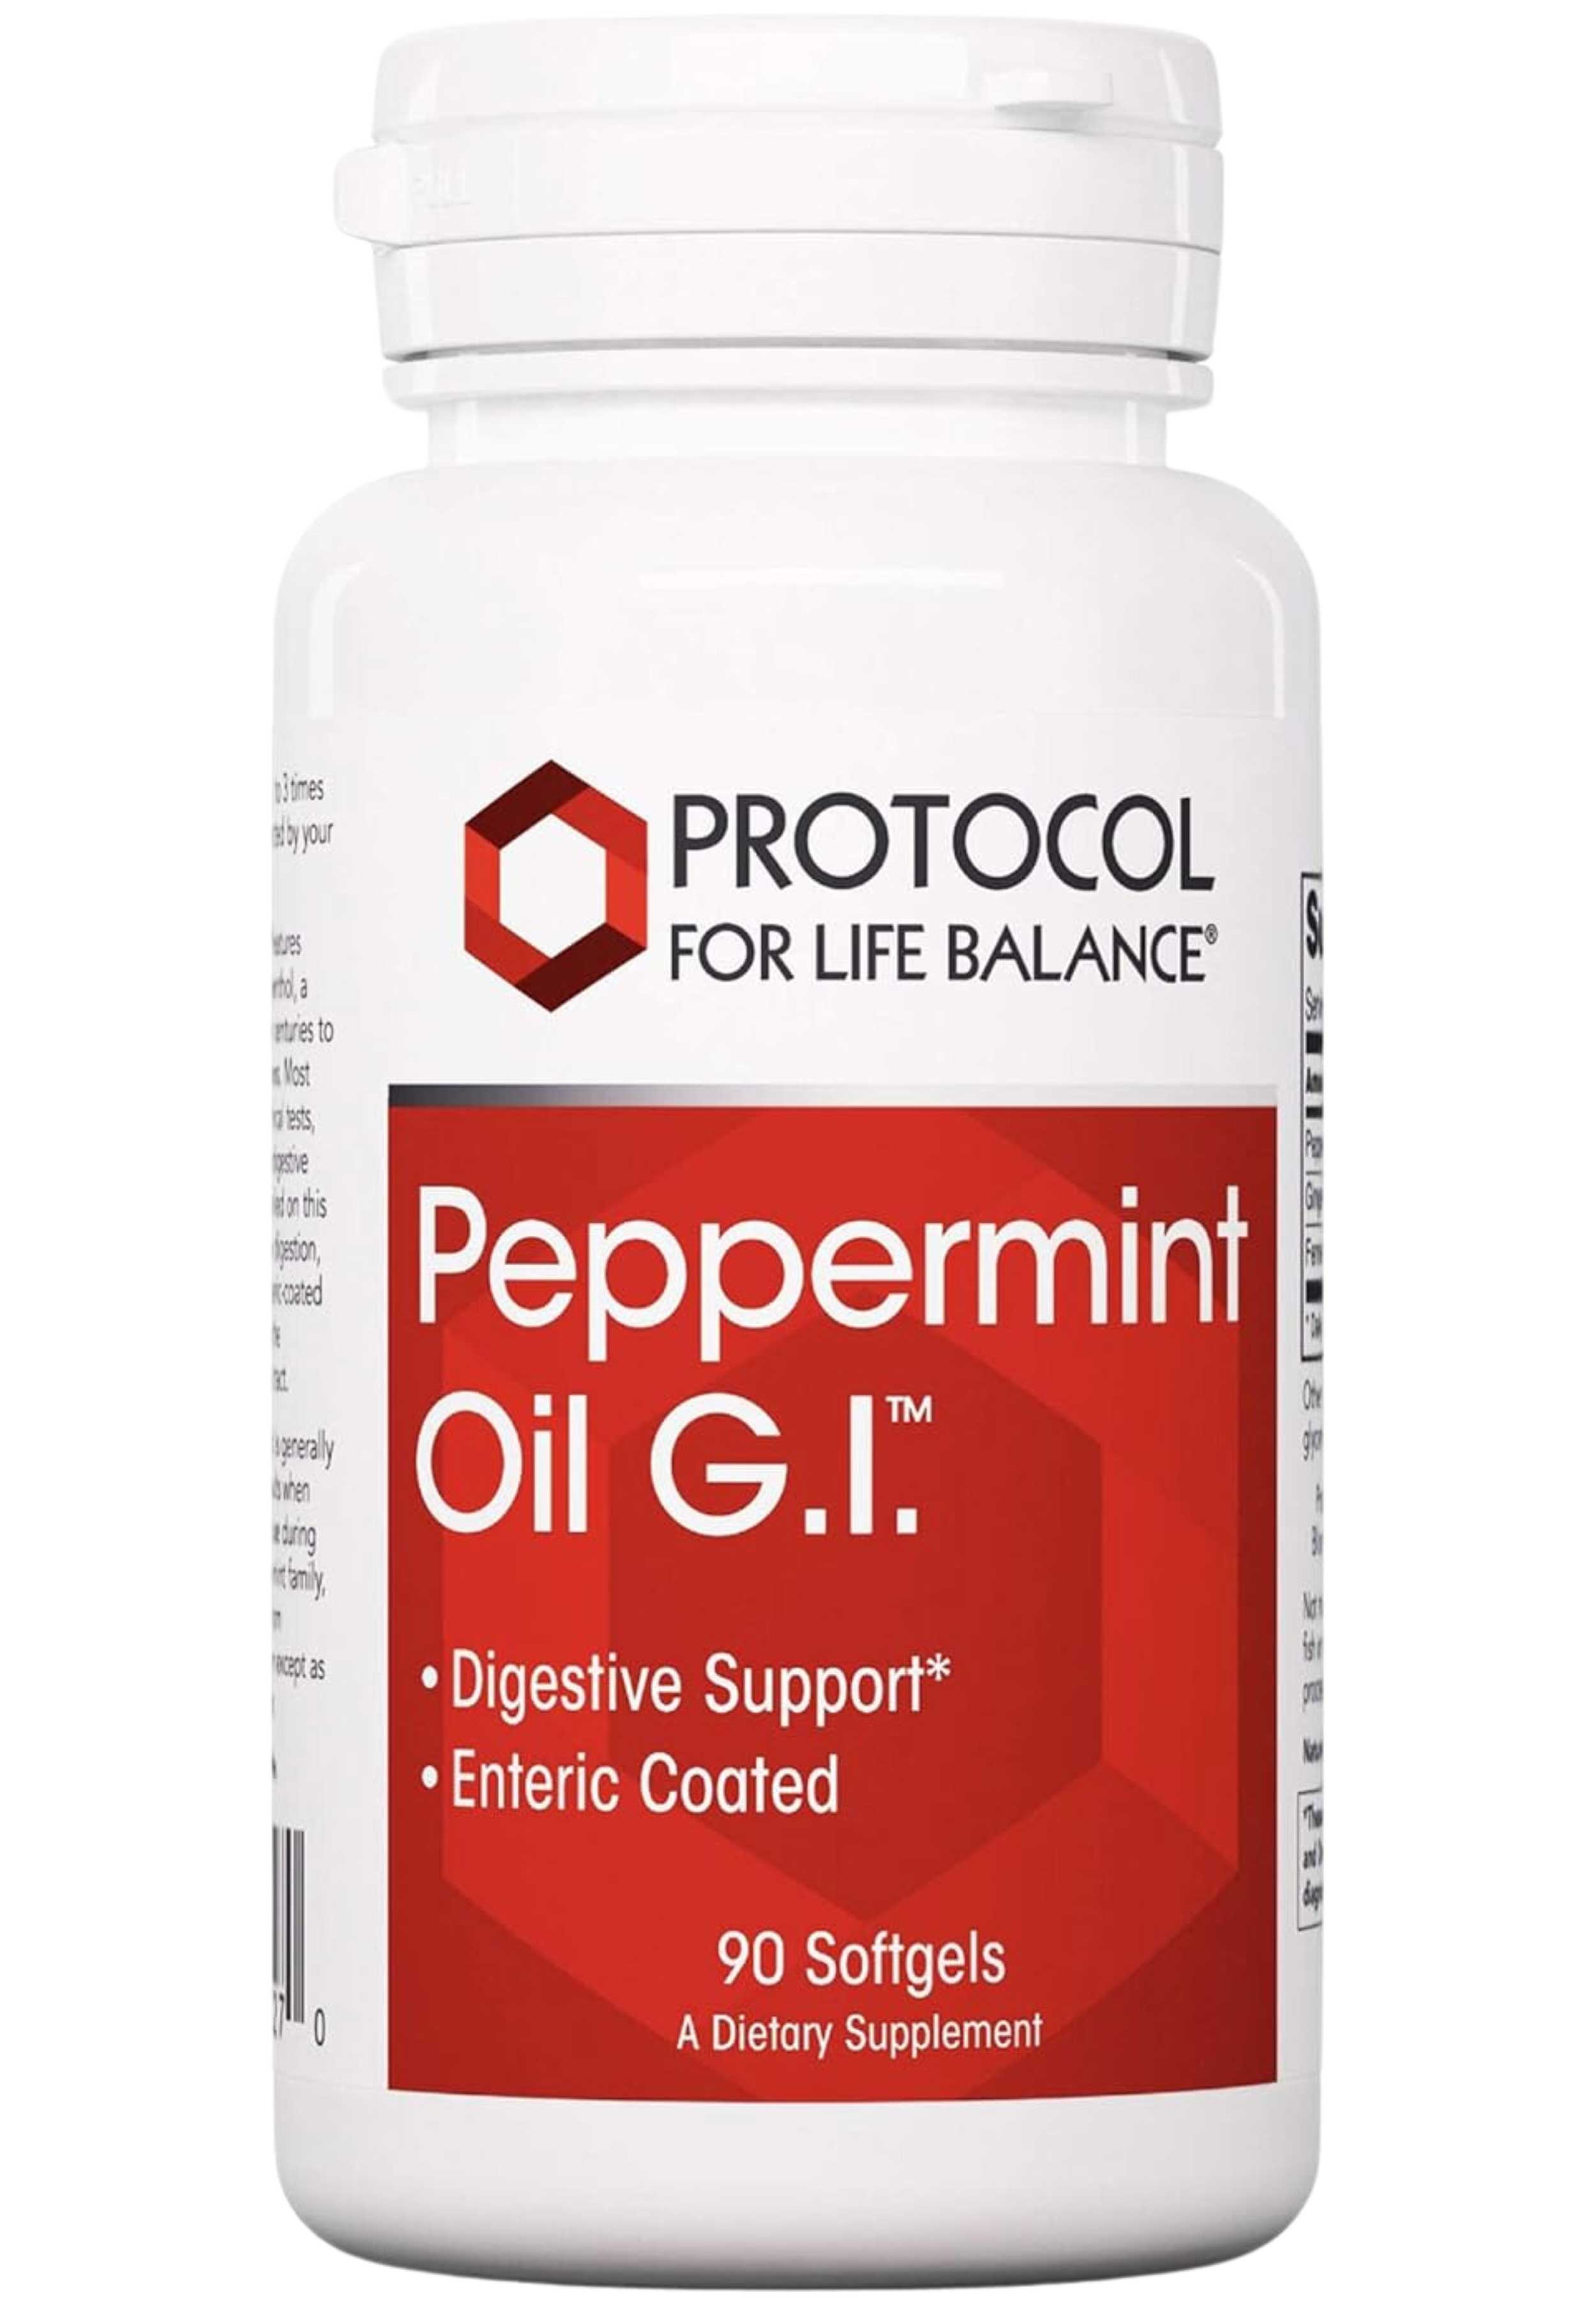 Protocol for Life Balance Peppermint Oil G.I.